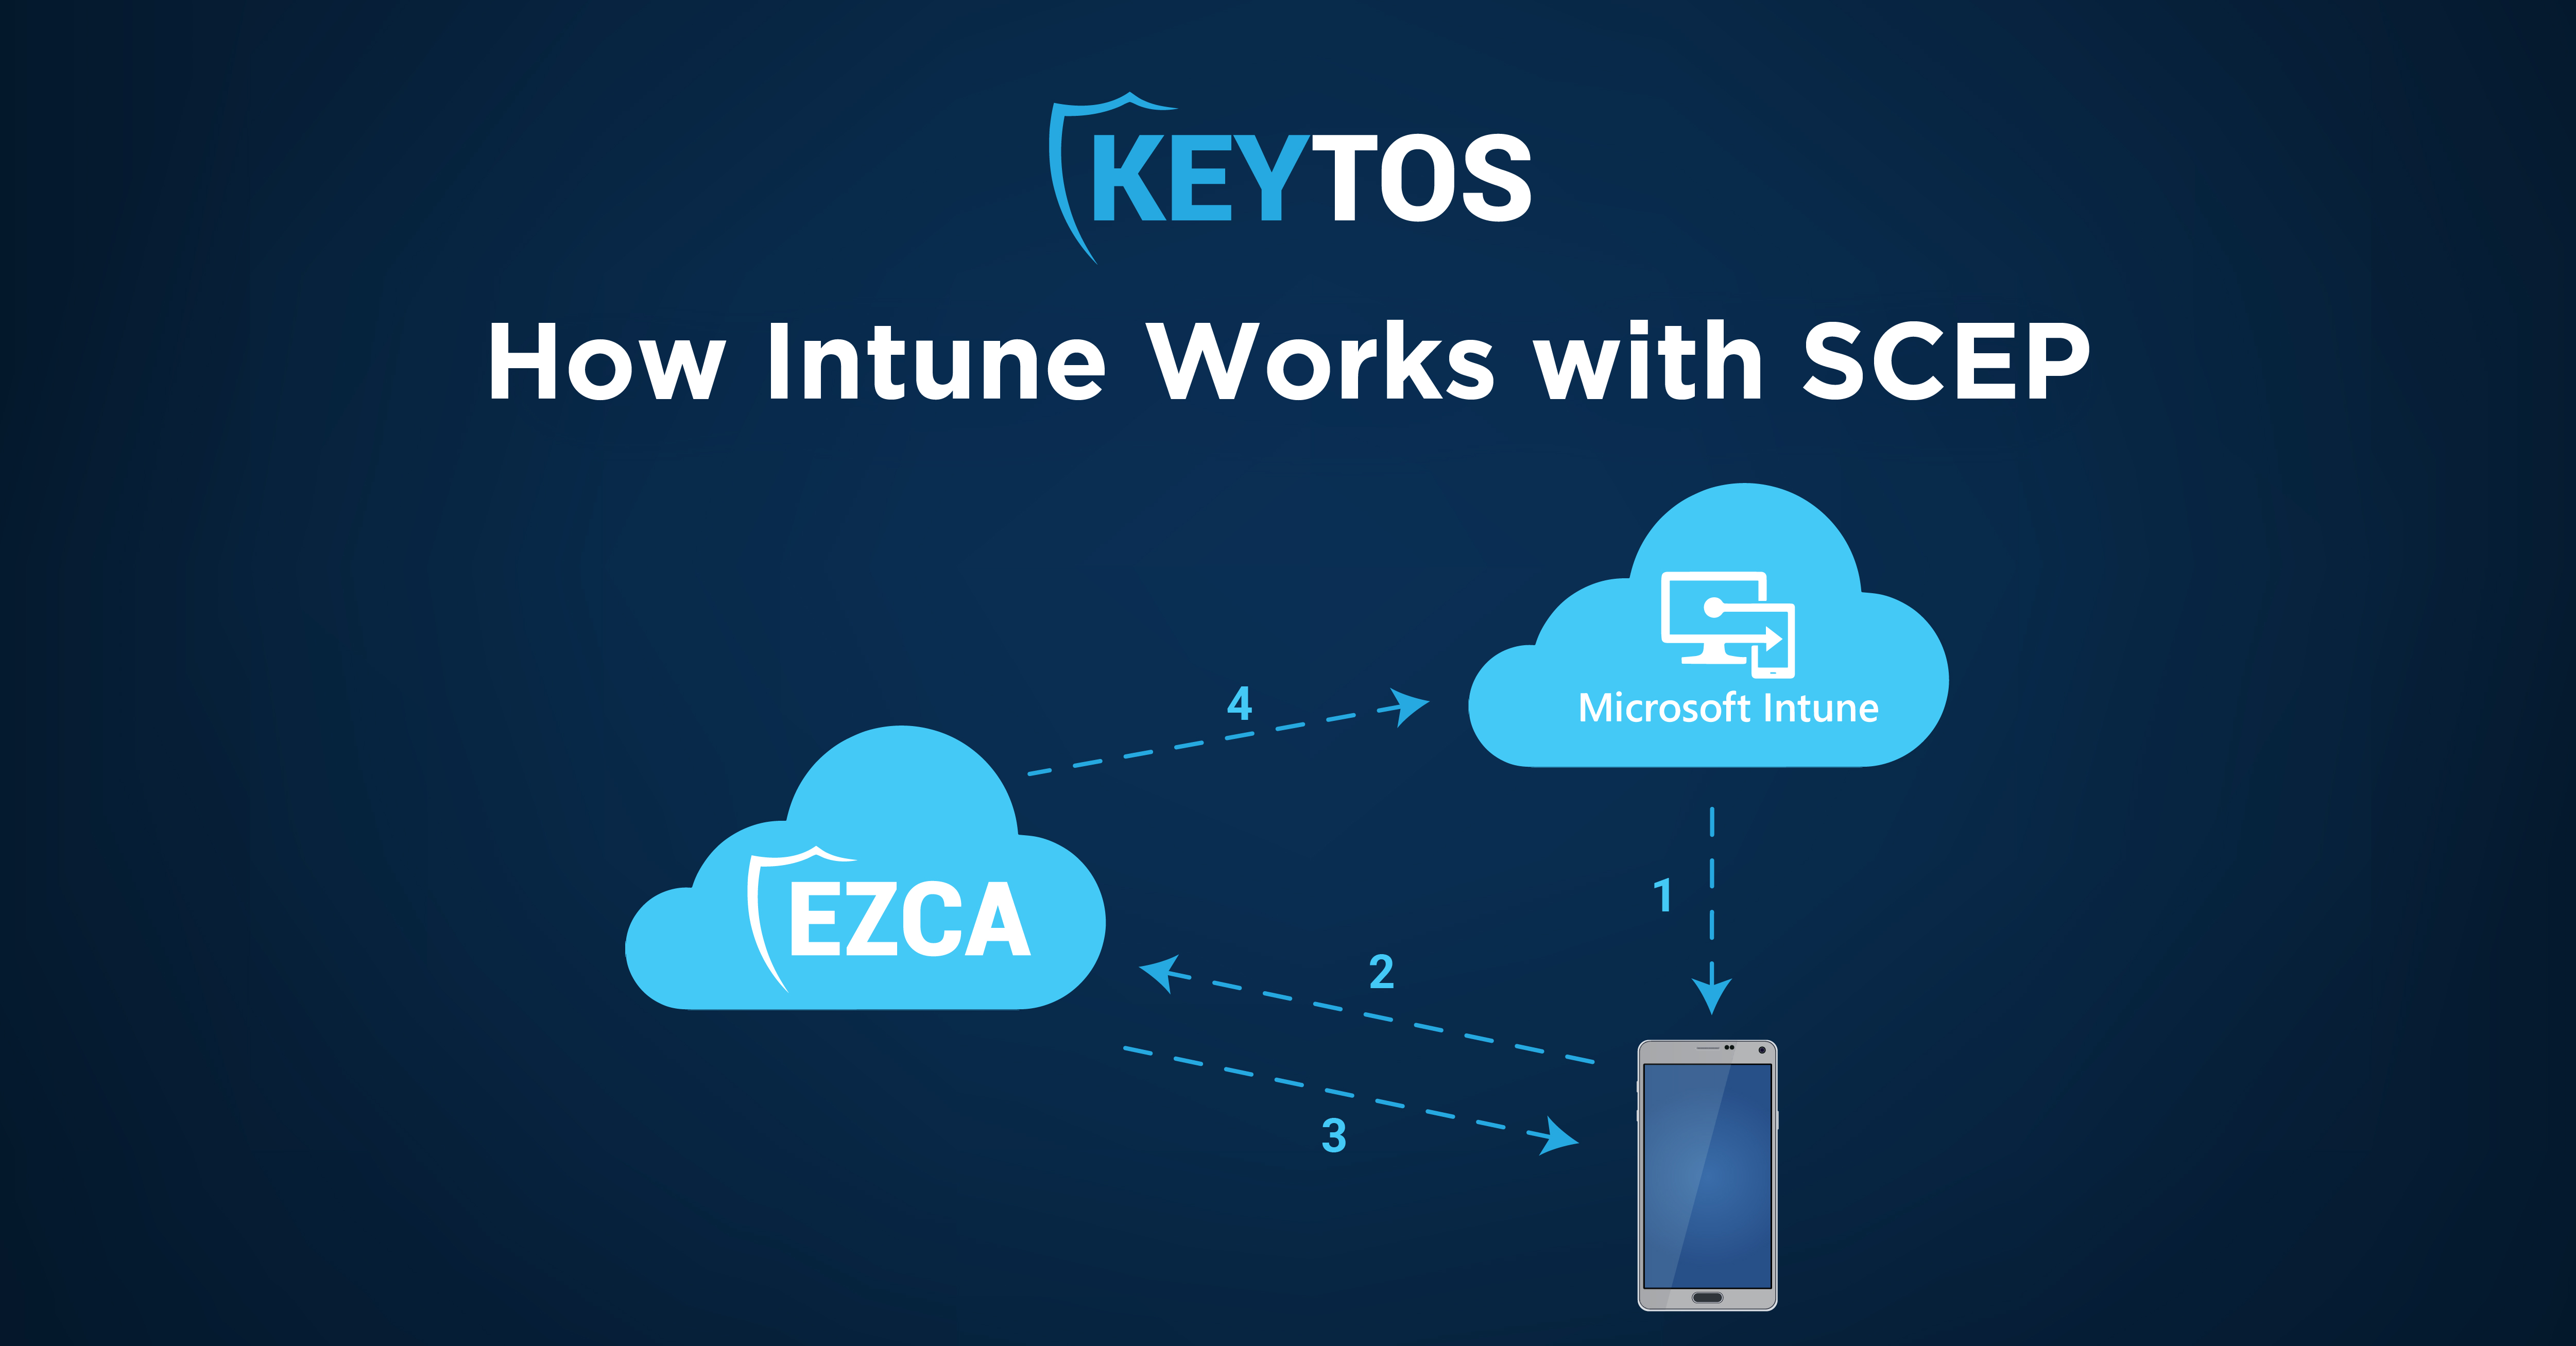 How Does Intune Work with SCEP?